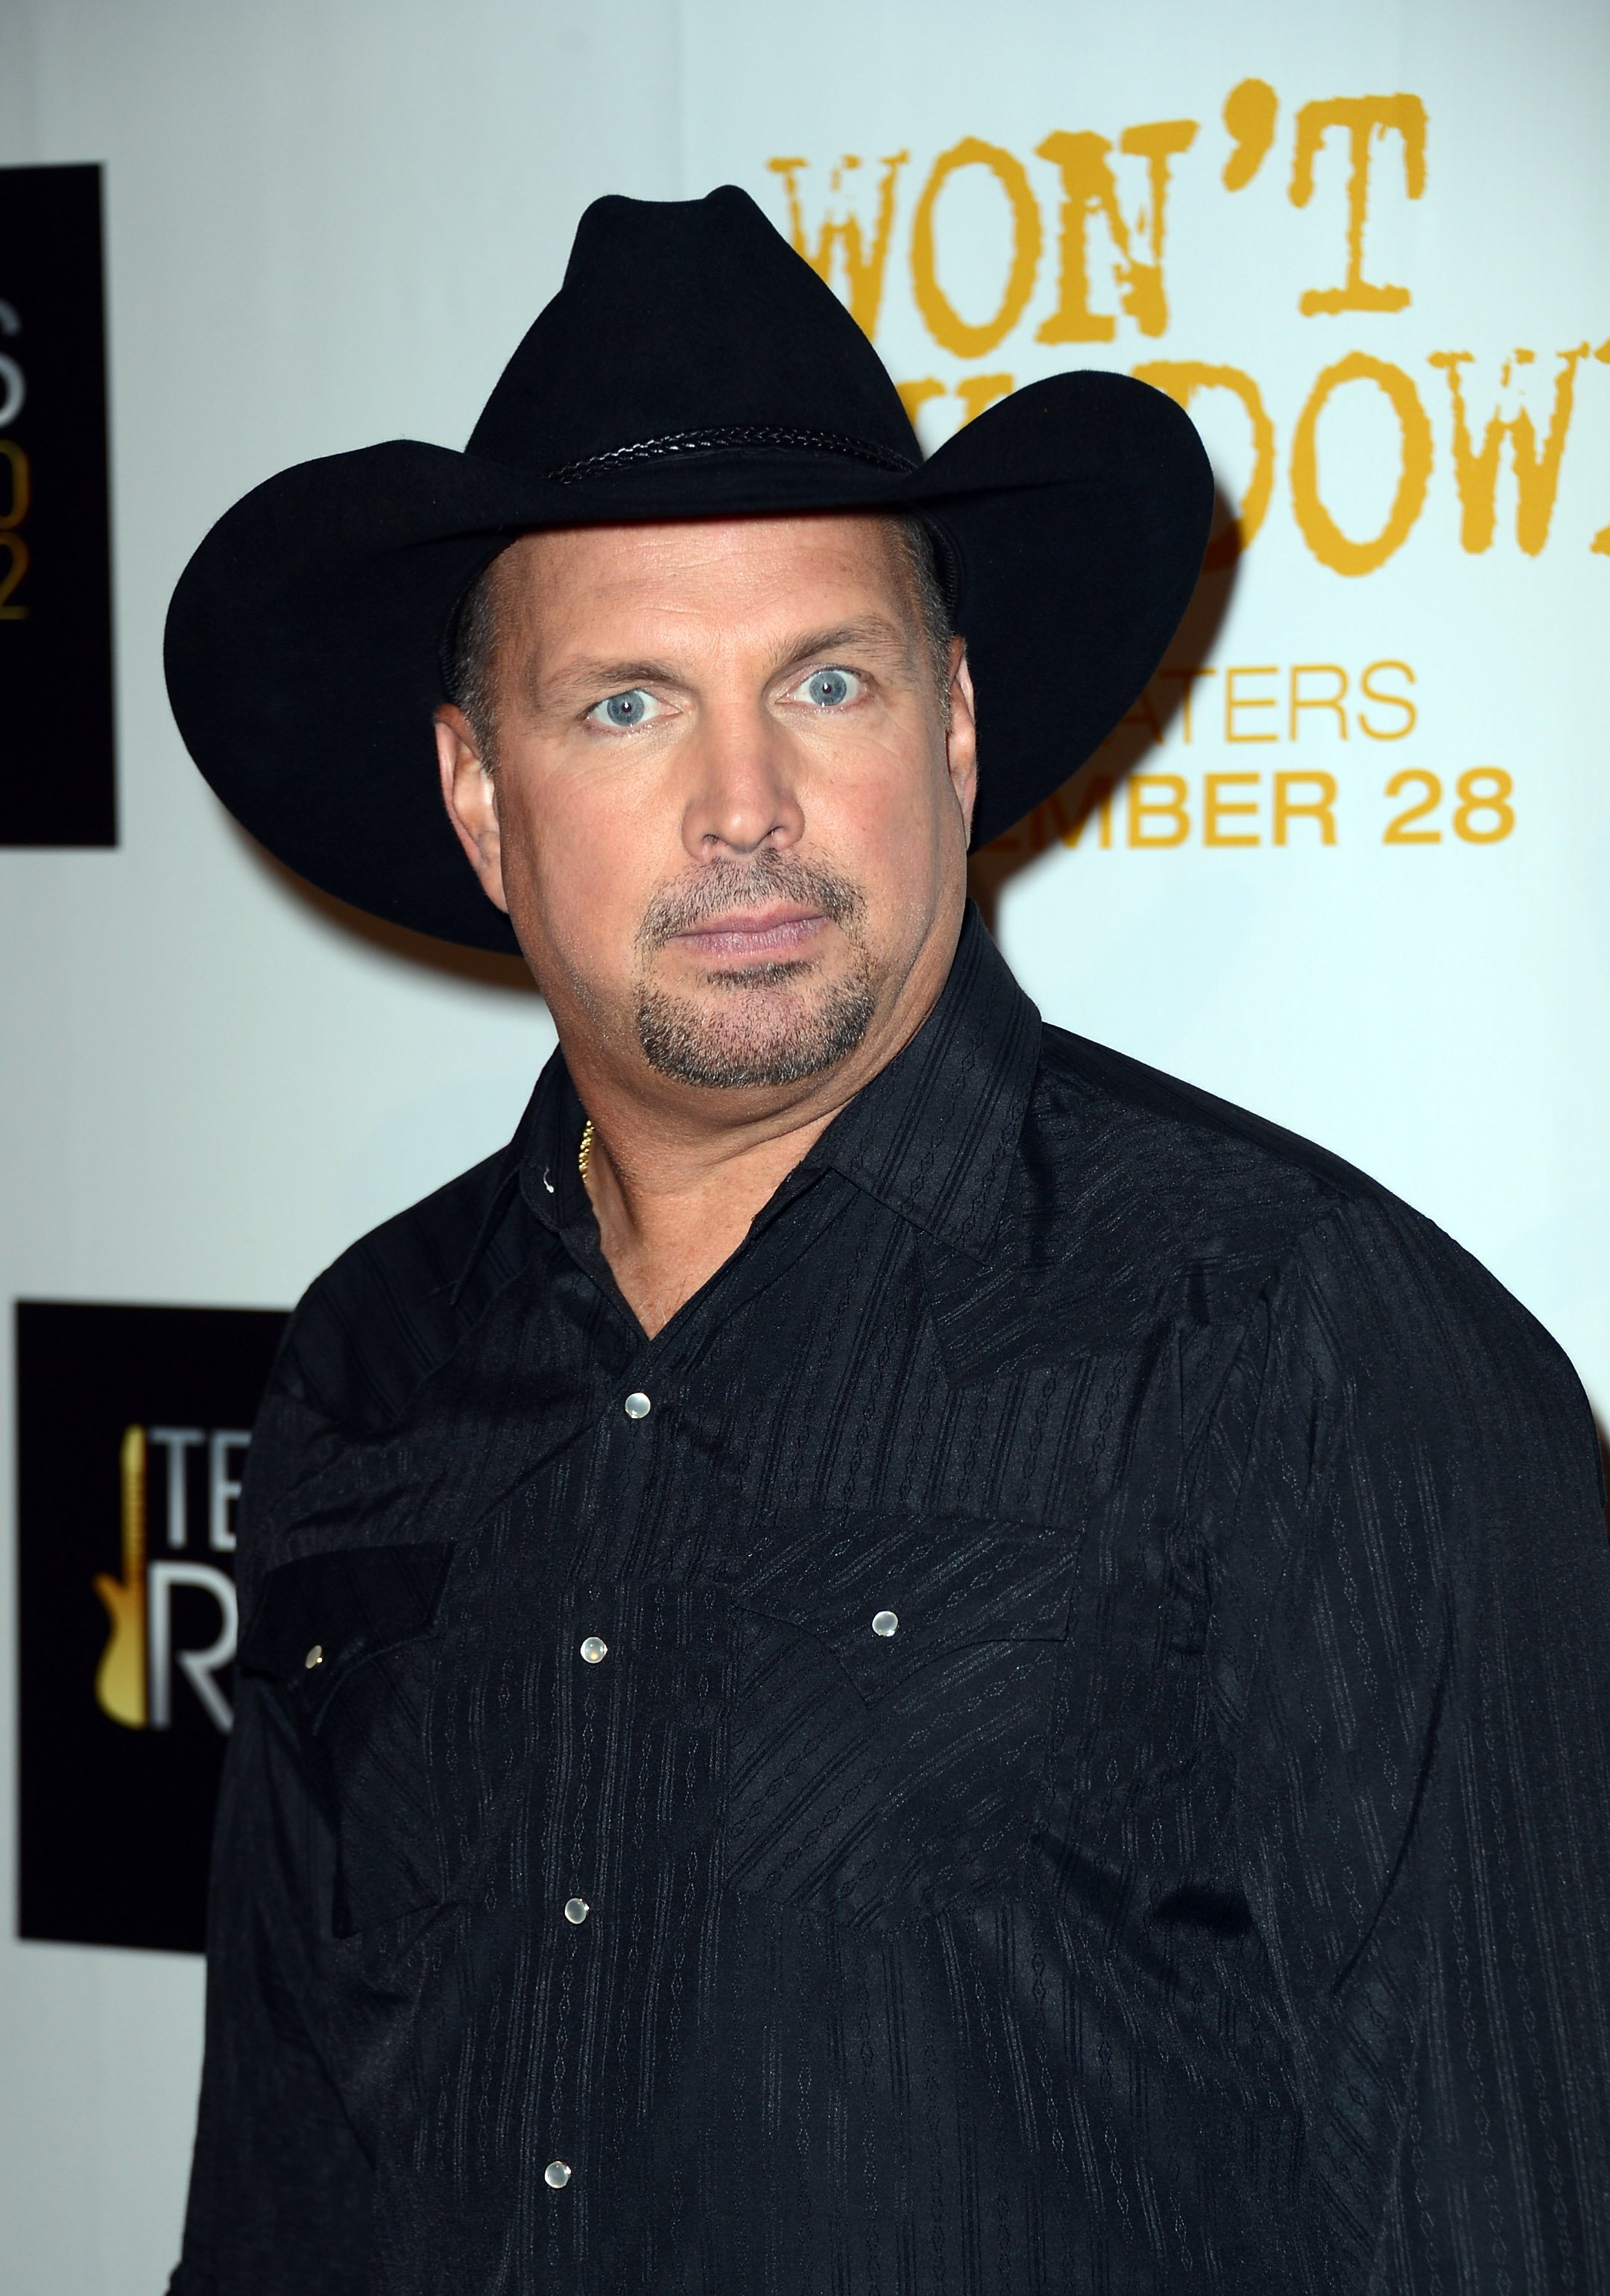 Garth Brooks attends a Live Concert Press Room event in Los Angeles, California on August 14, 2012 | Photo: Getty Images